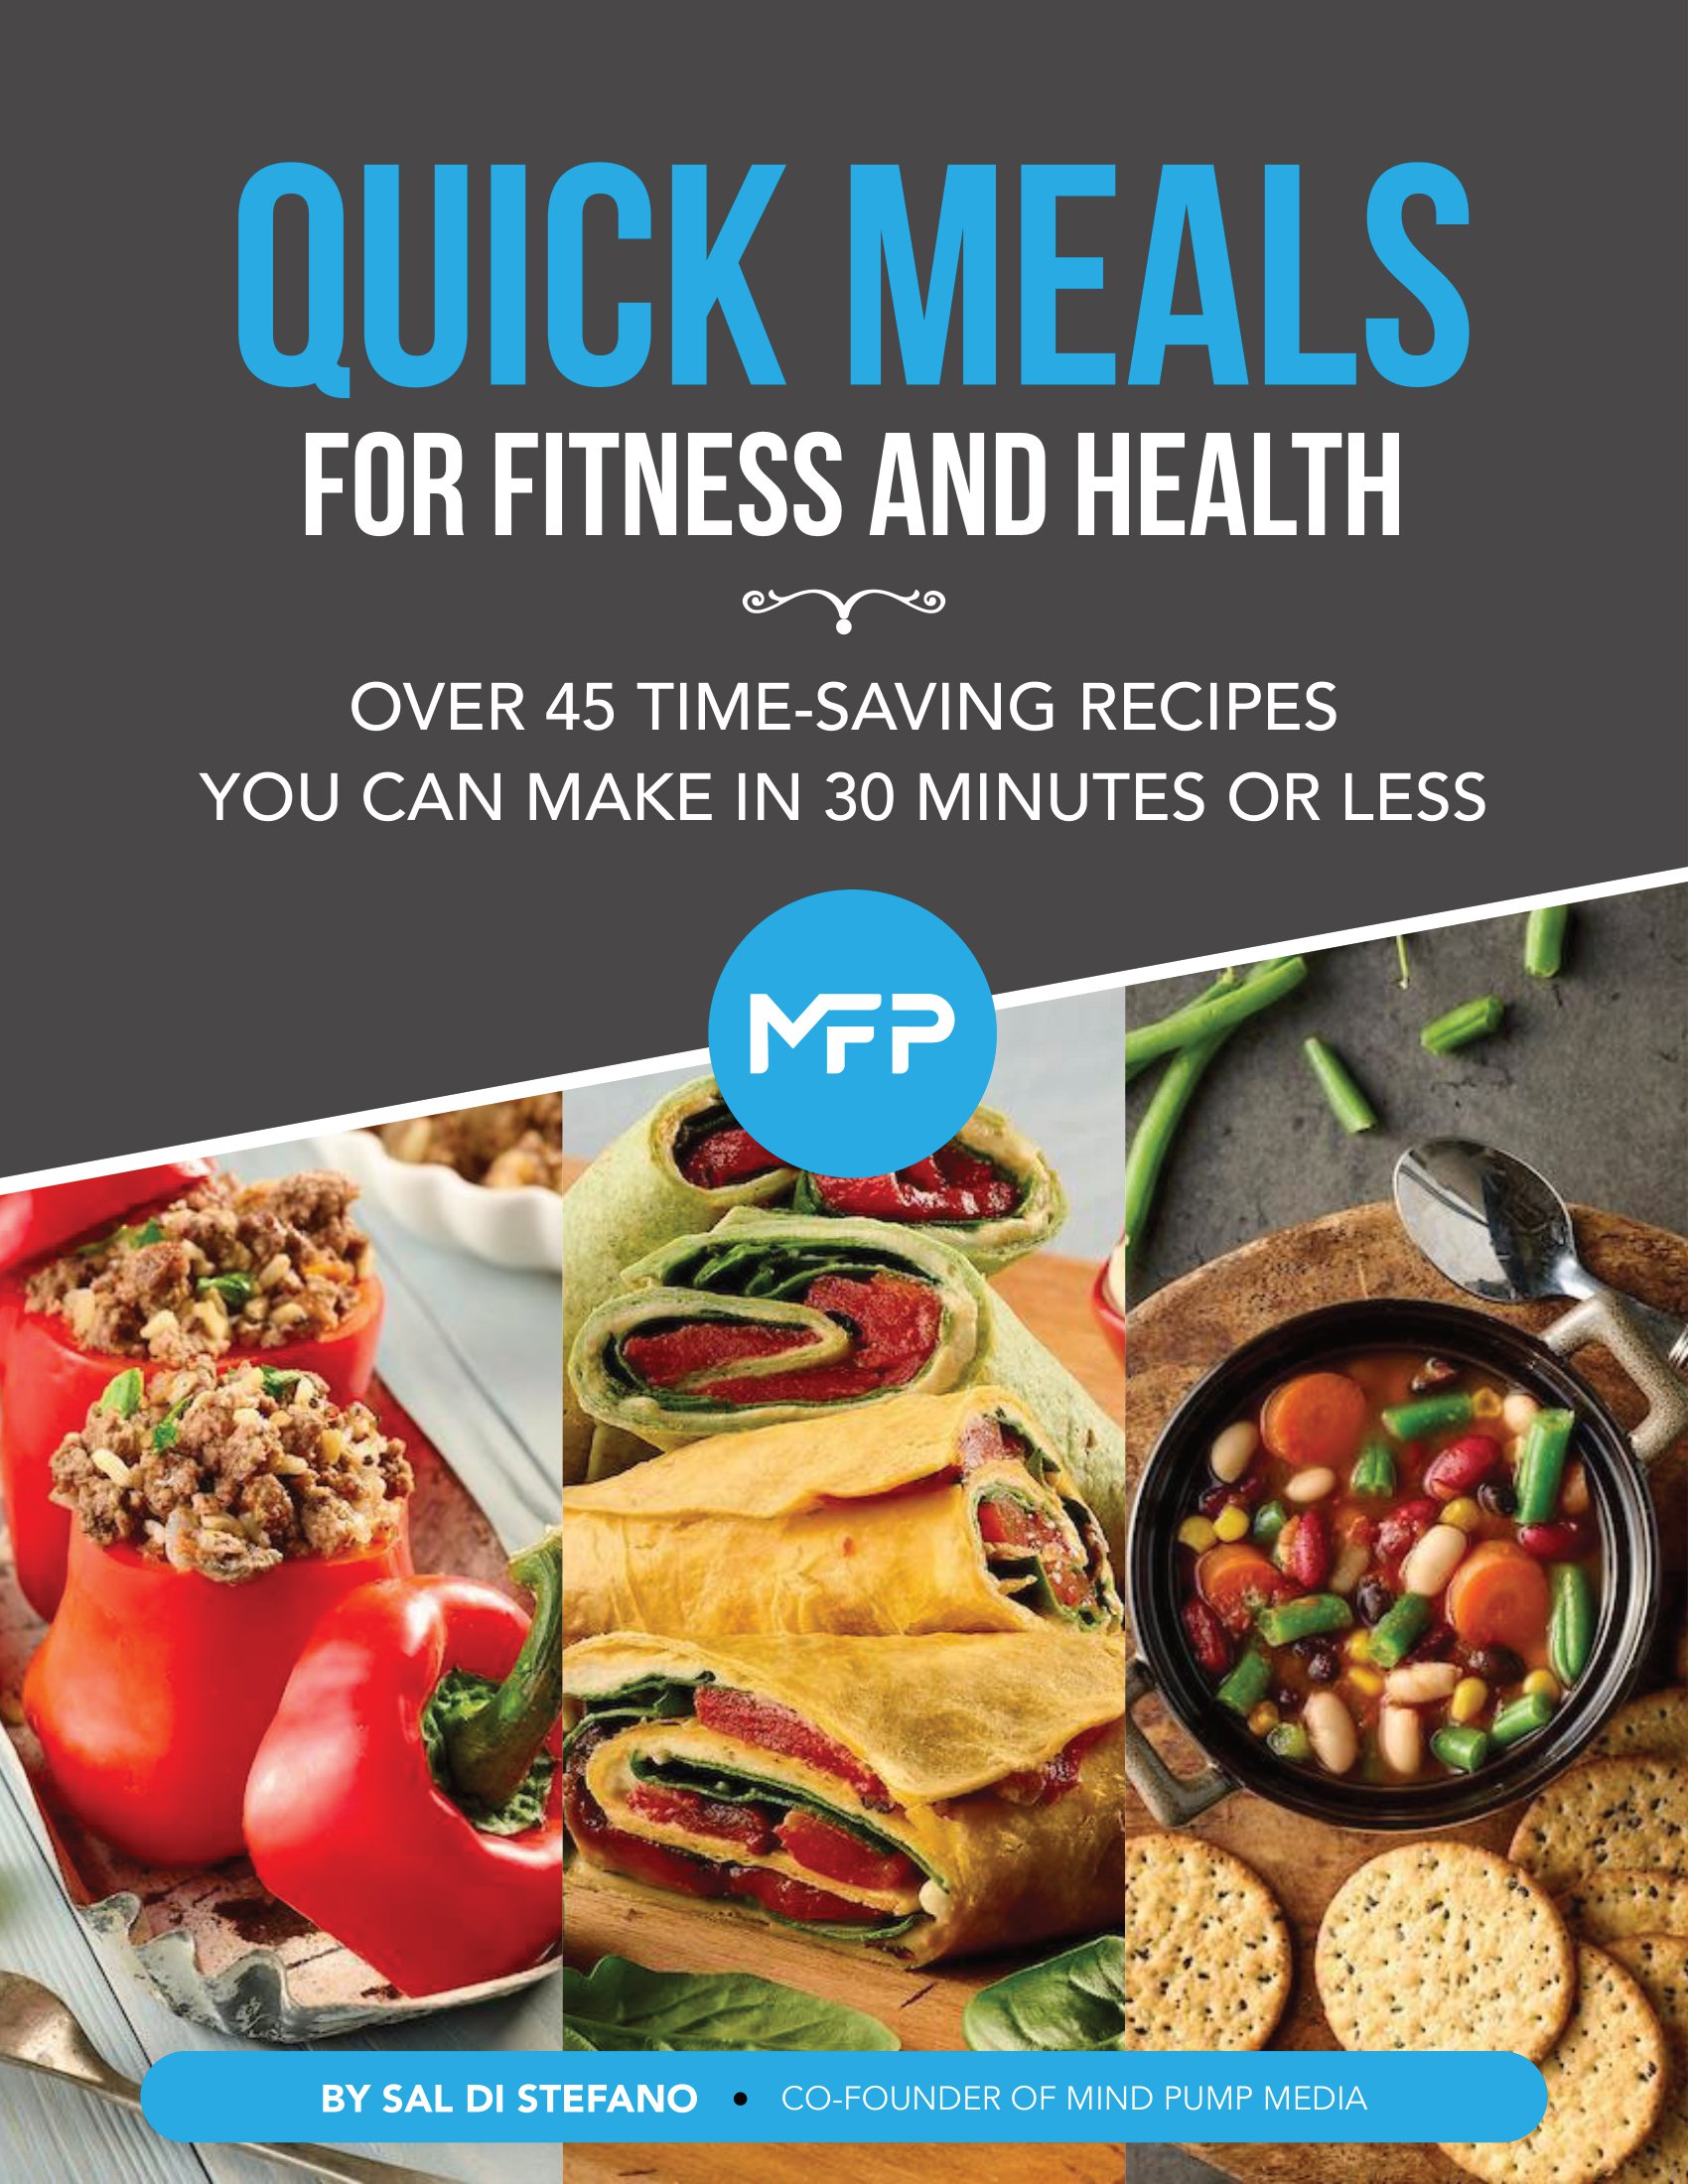 Quick meals for Fitness and Health